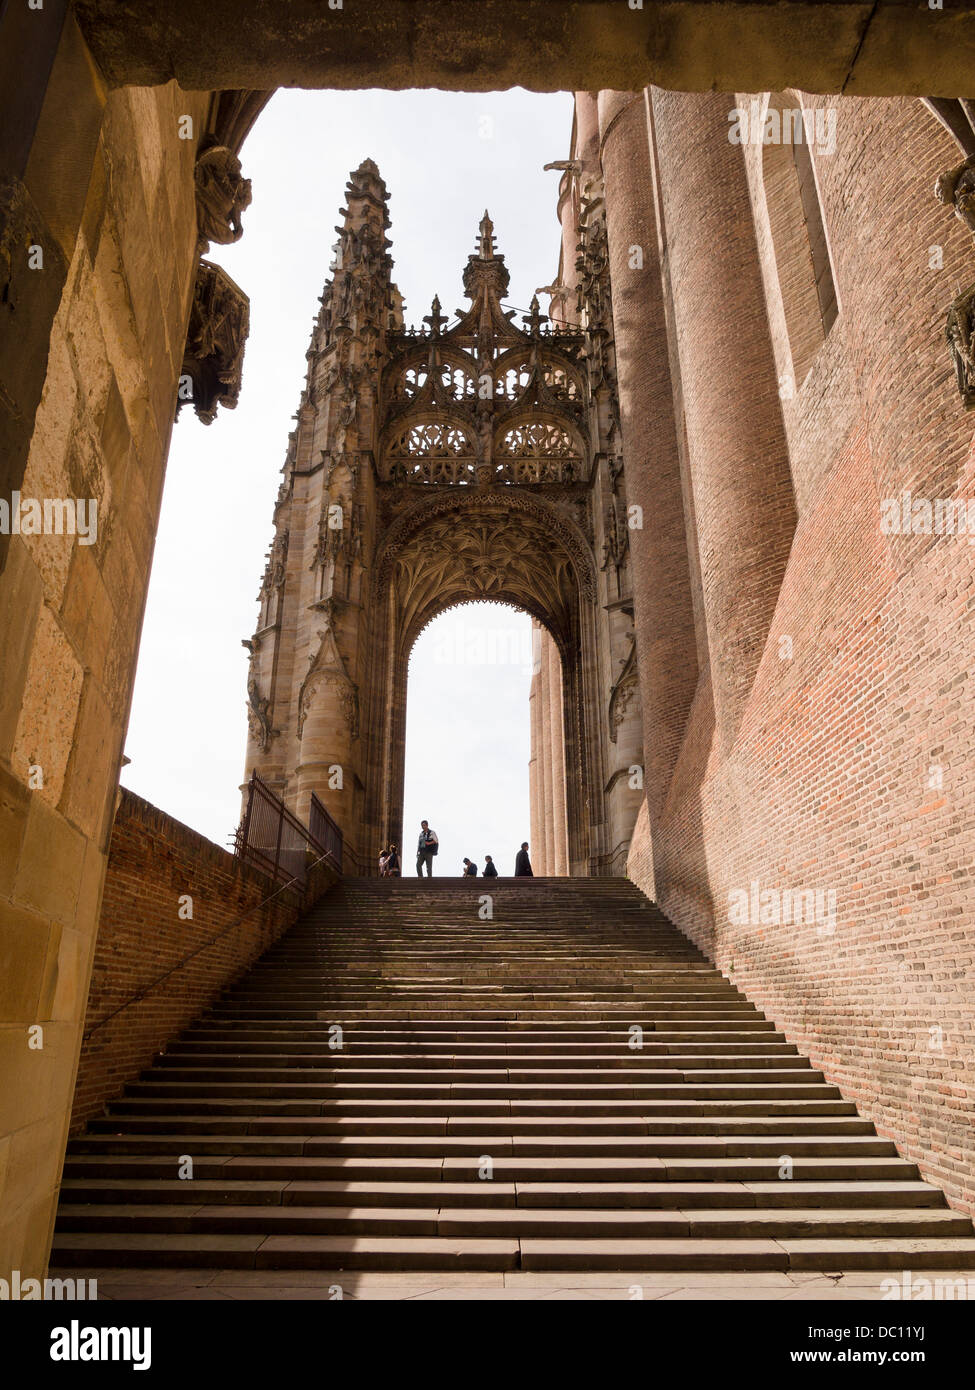 Albi Cathedral Entrance. The grand staircase leading to the gothic encrusted main entrance to the cathedral. Stock Photo